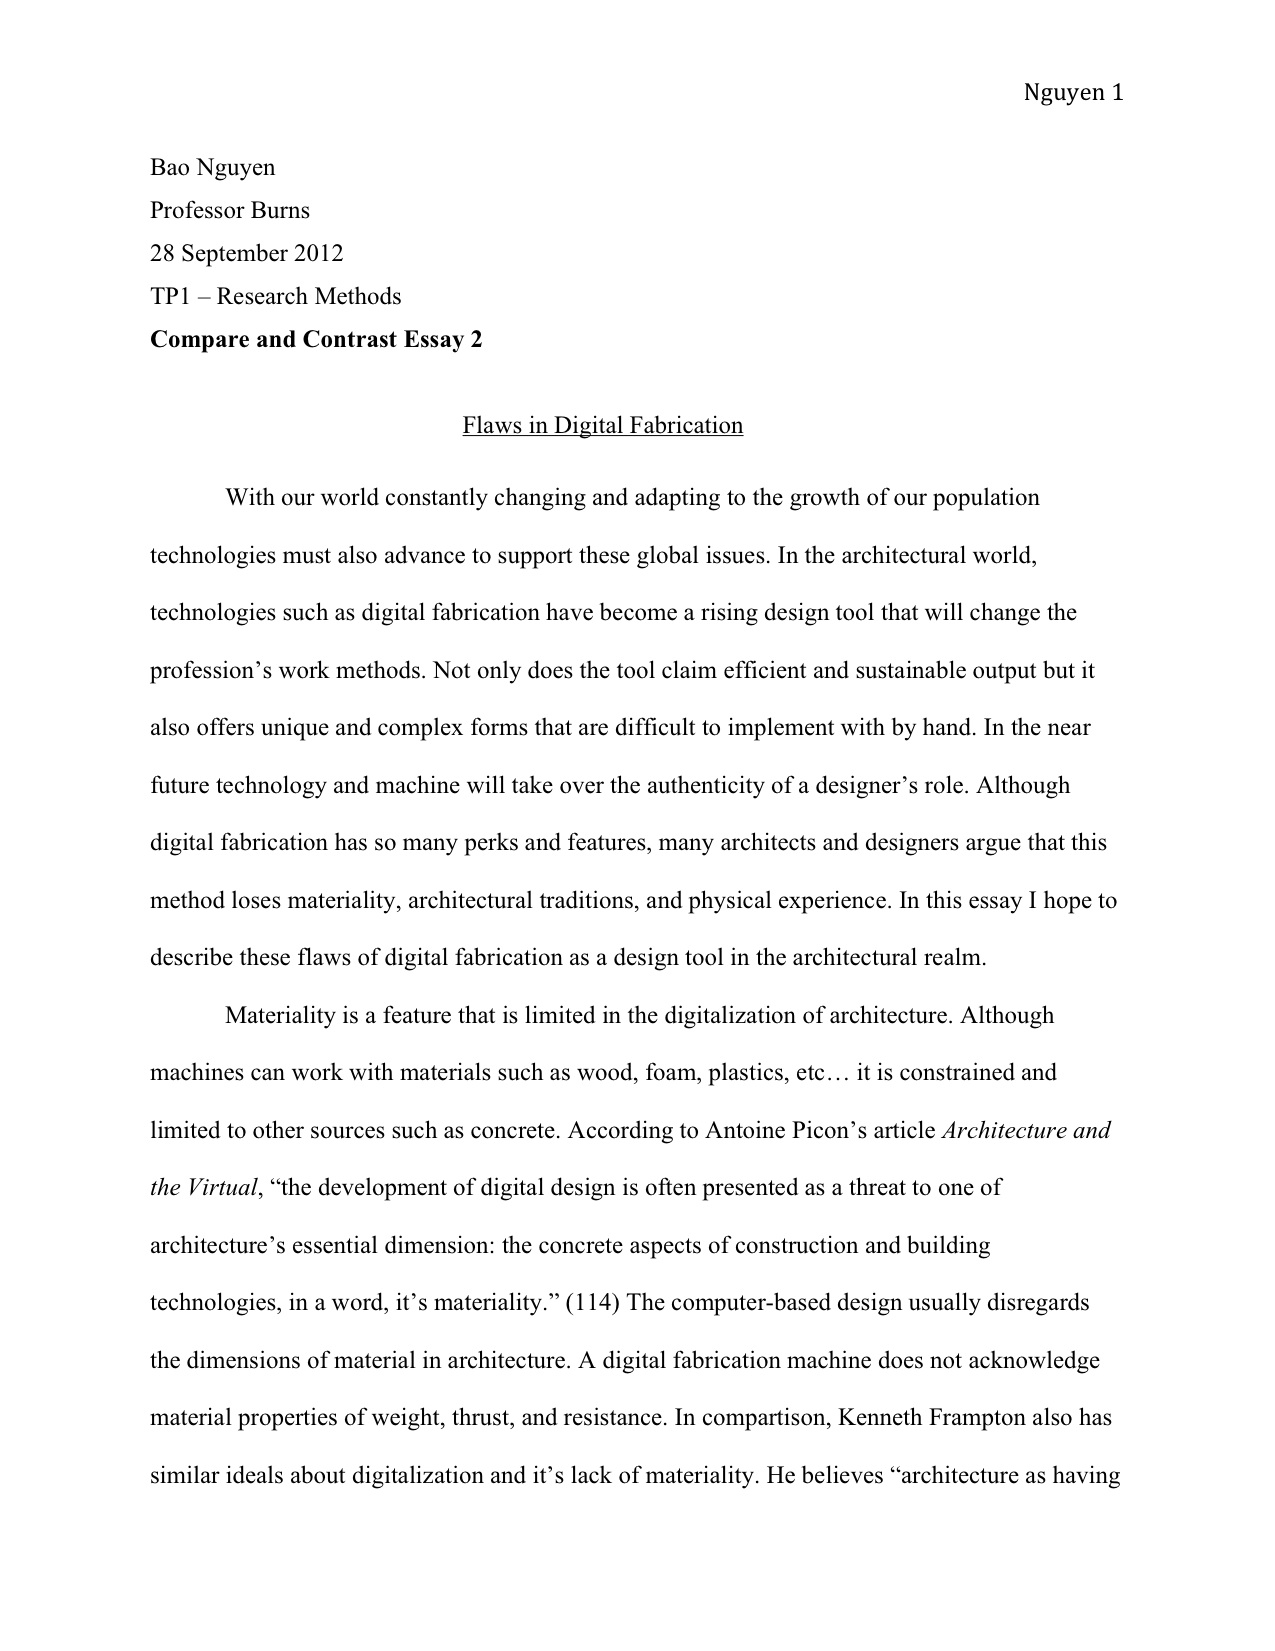 How to write your dissertation proposal